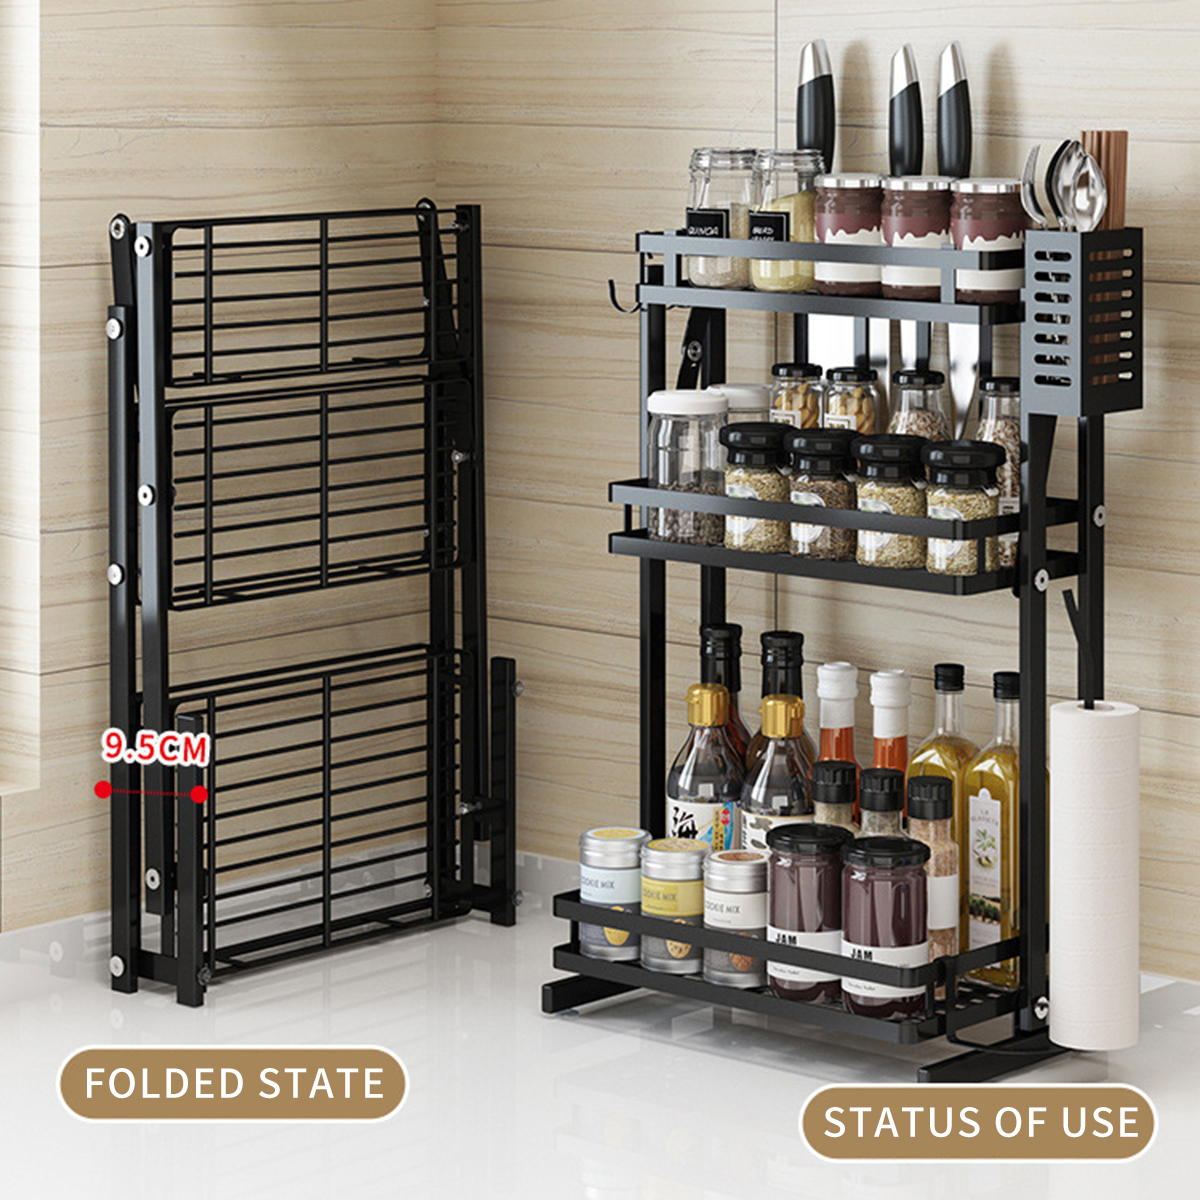 Spice-Rack-Kitchen-Counter-Organizer-with-4-Suction-Pads-Large-Capacity-for-Essential-Oils-Steady-Ba-1807821-5